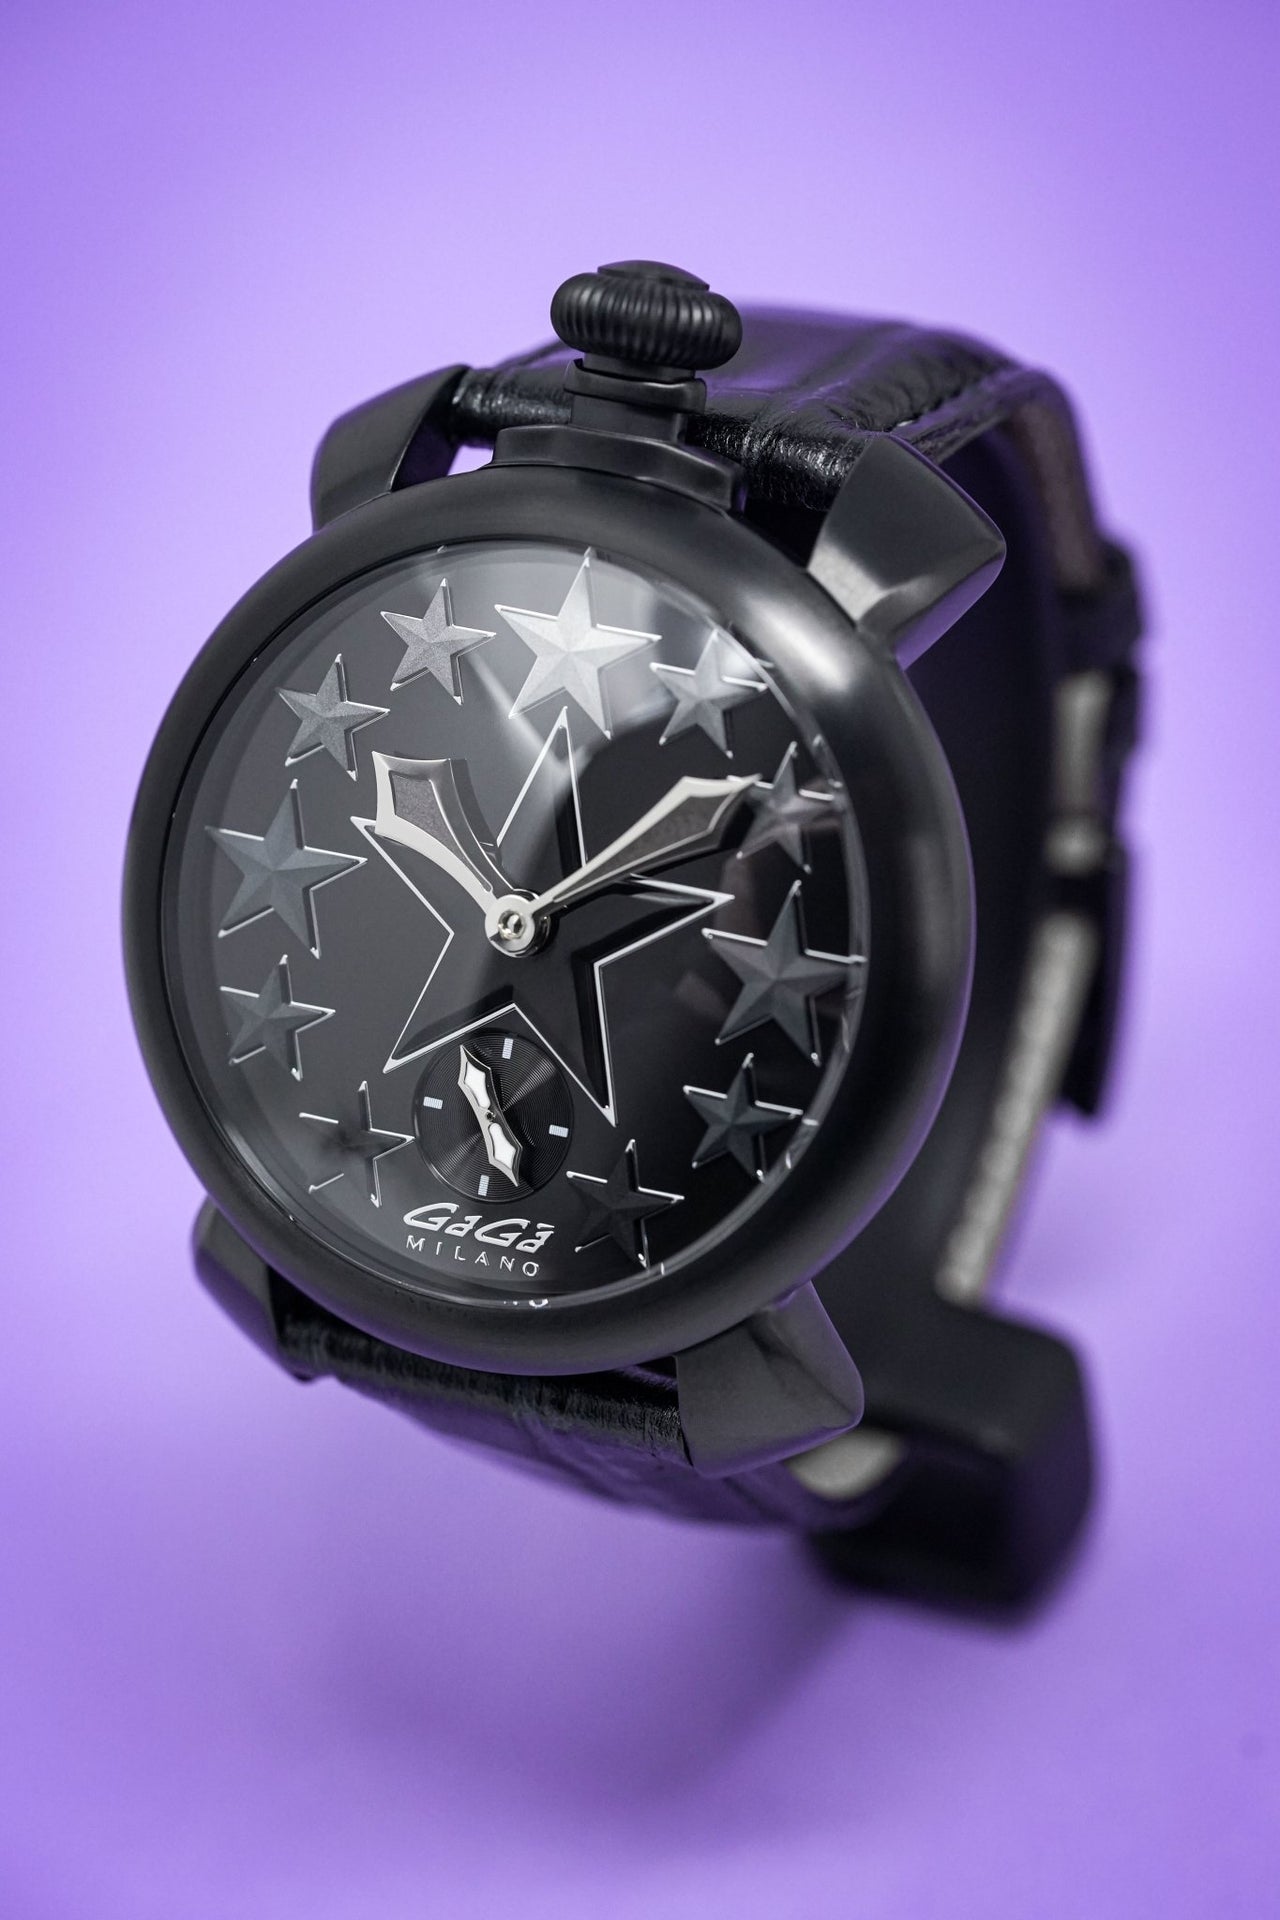 GaGà Milano Manuale 48MM Men's Watch Stars Black PVD - Watches & Crystals